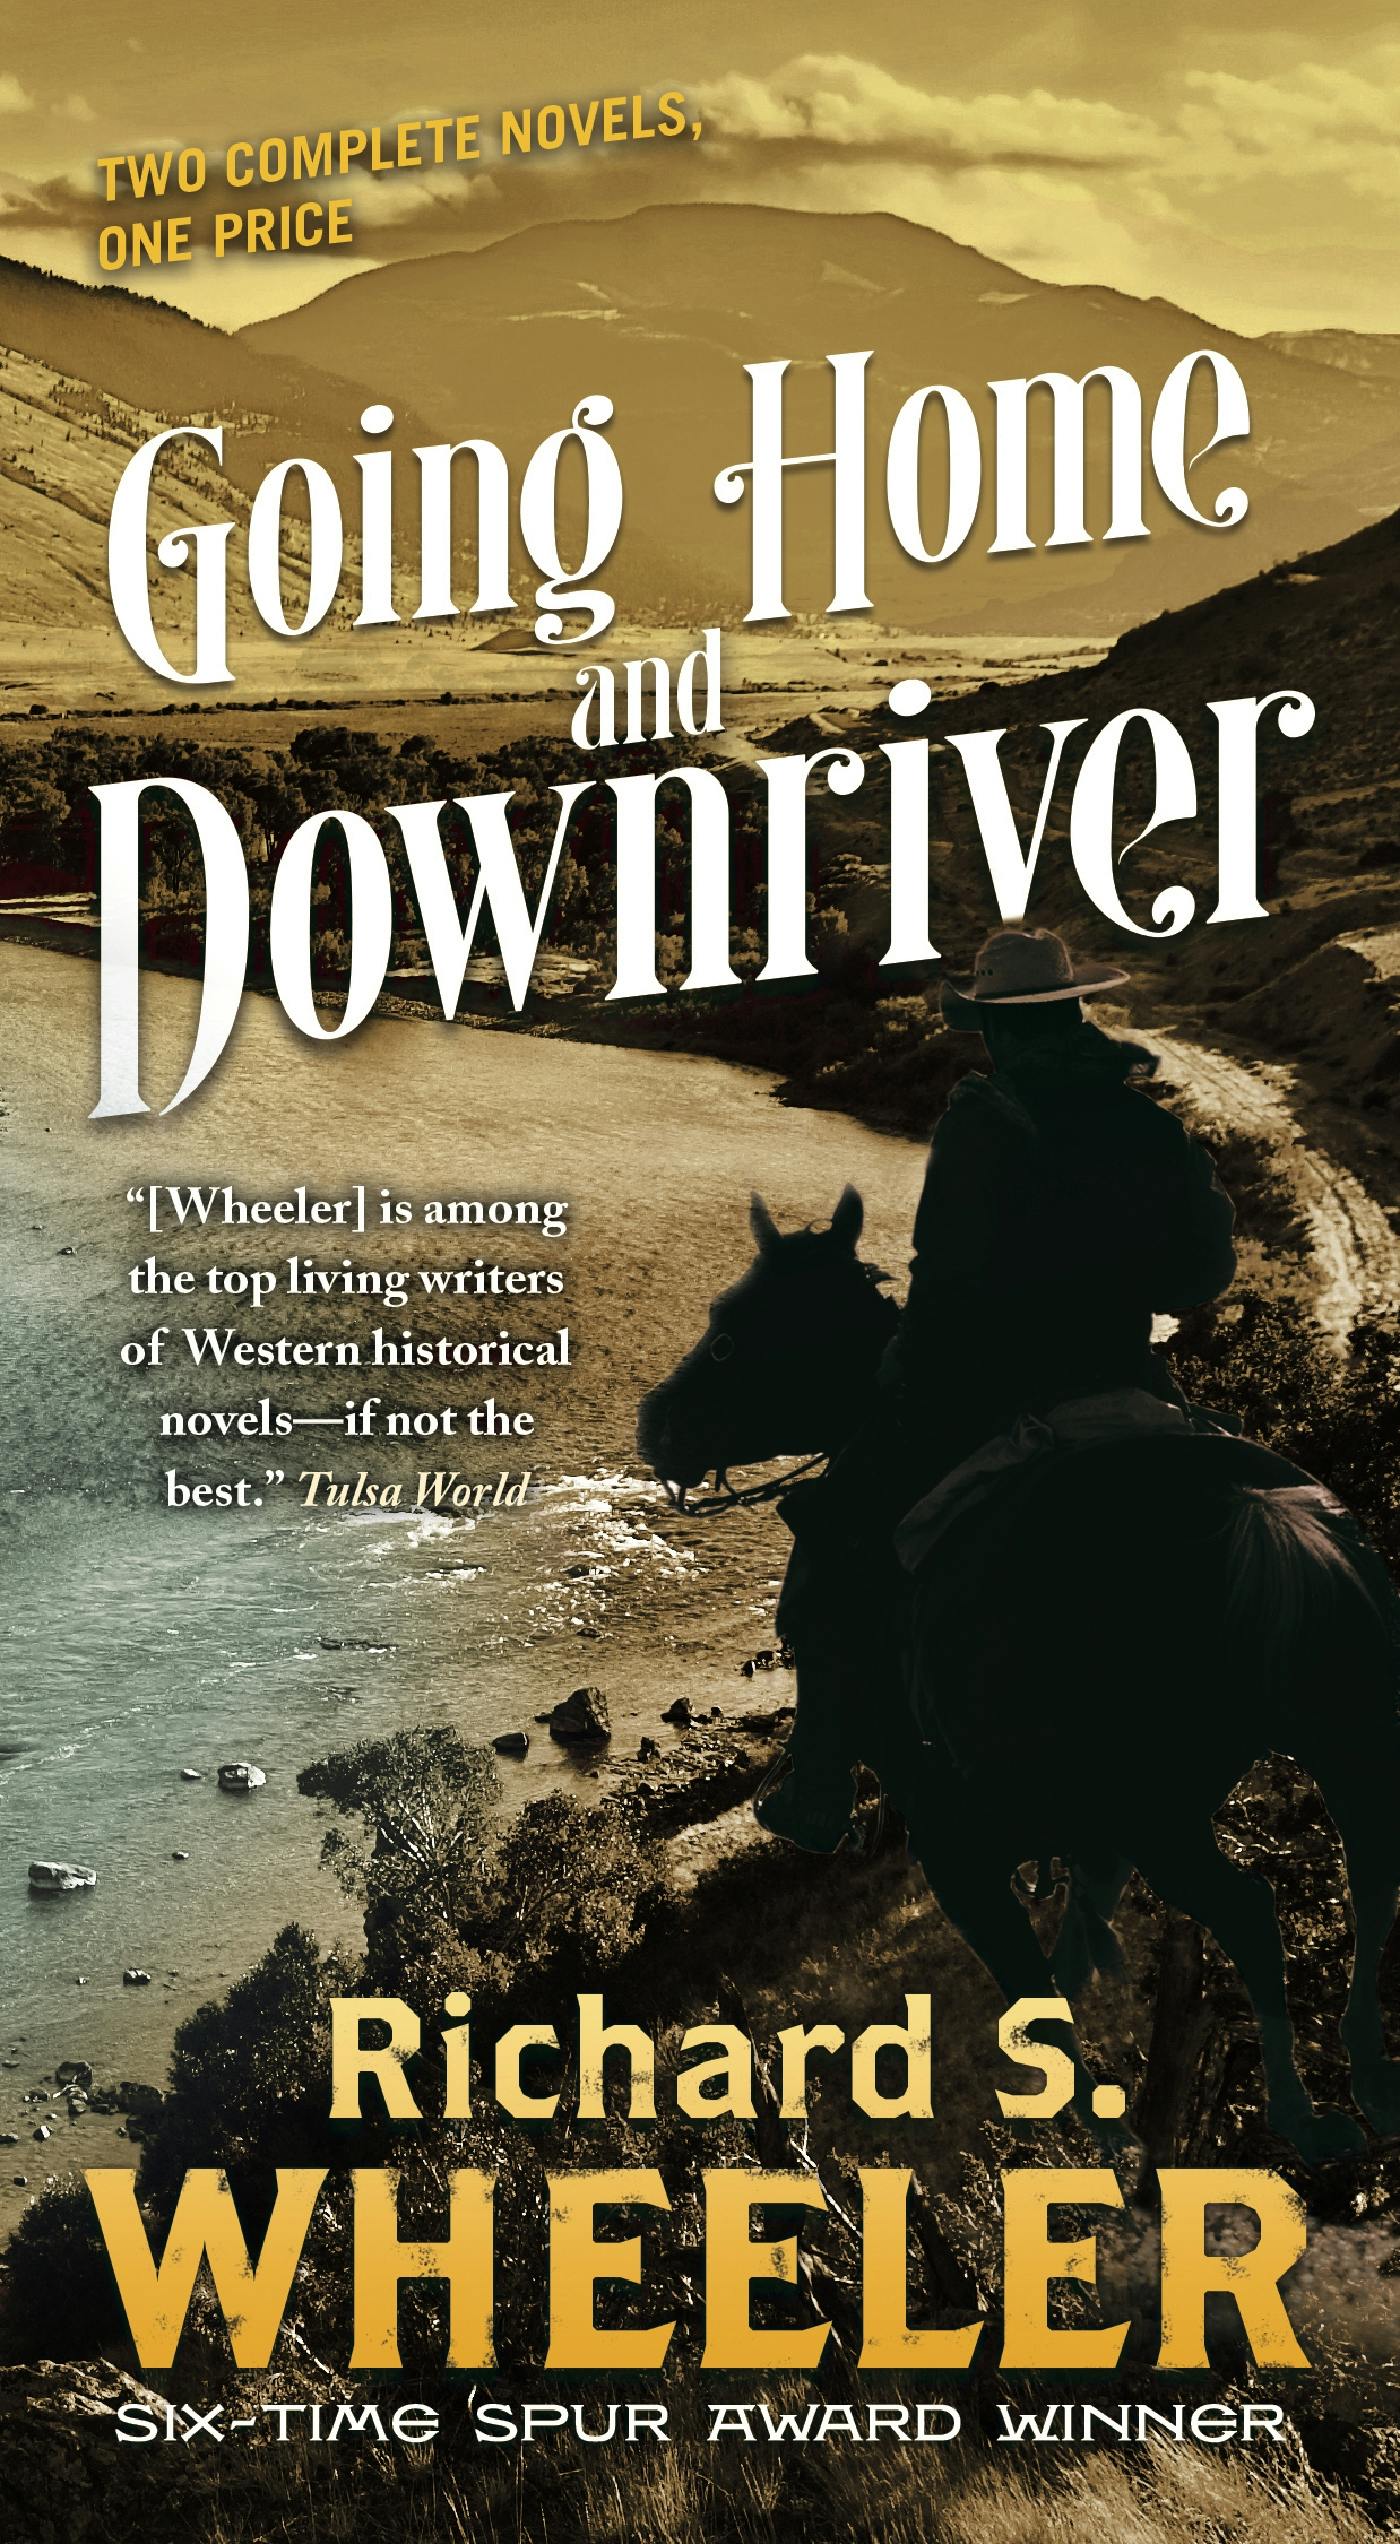 Cover for the book titled as: Going Home and Downriver